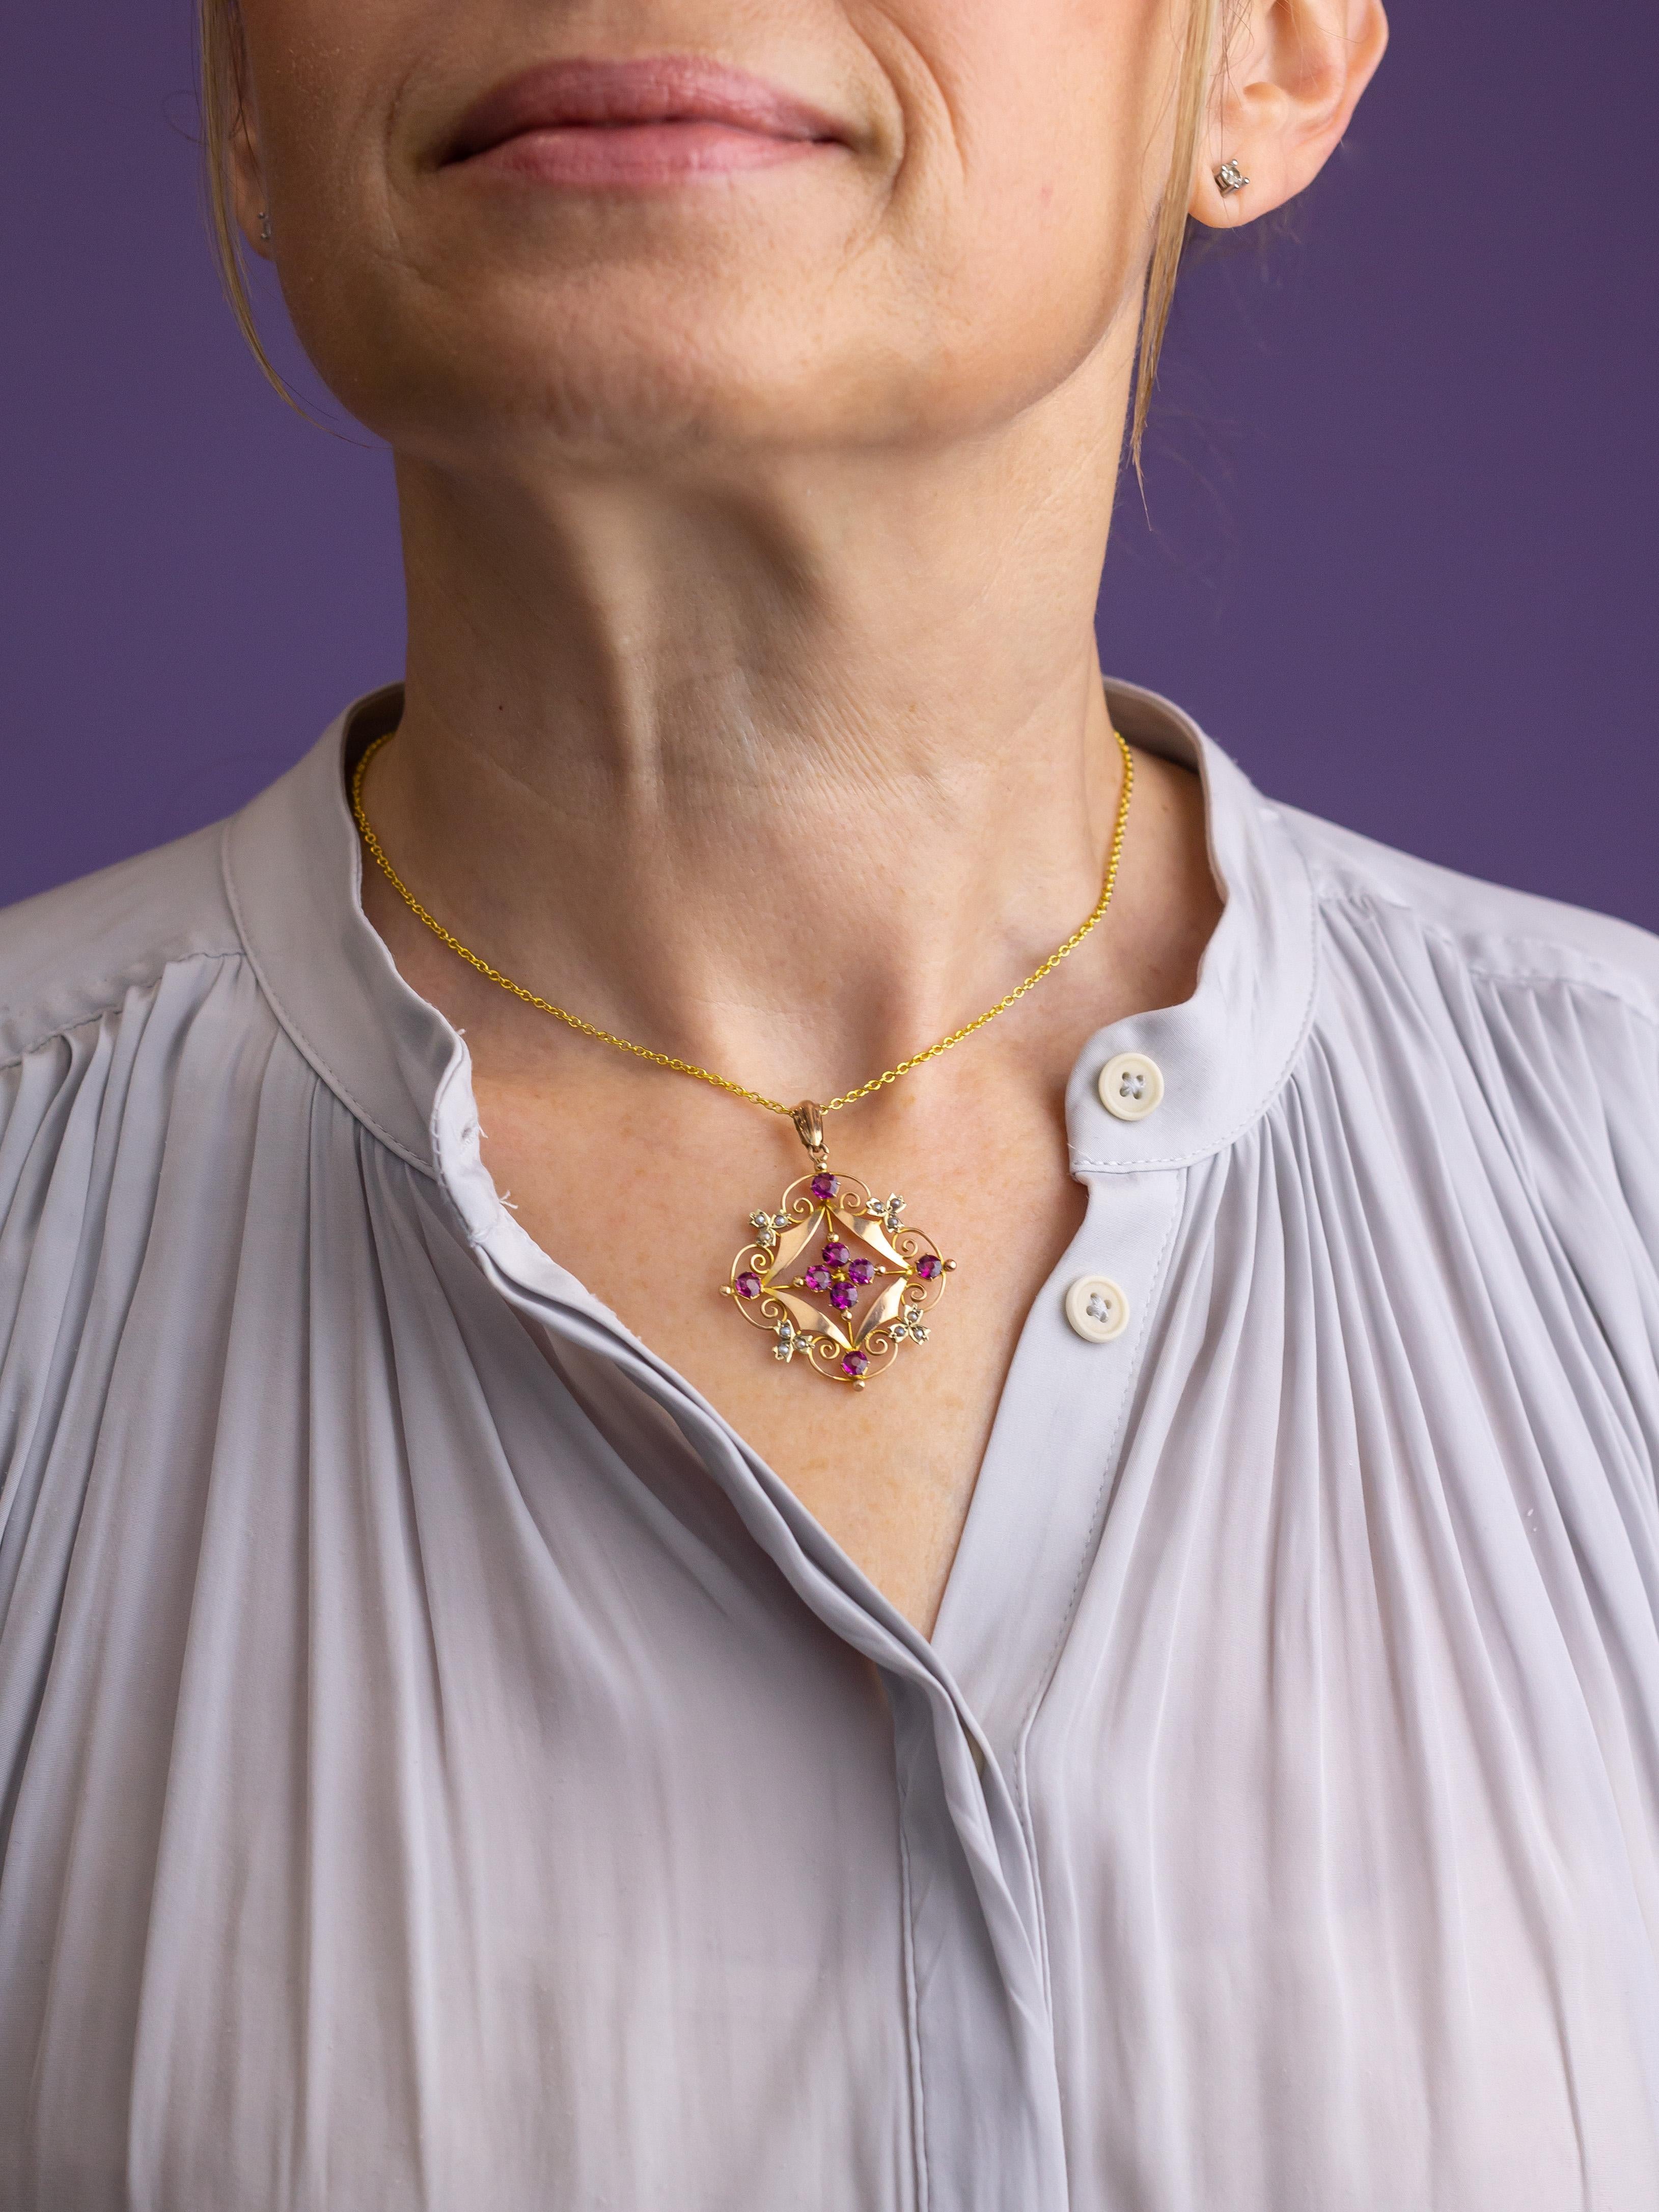 This Art Nouveau pendant has been crafted from 9 karat yellow gold and has been set with pink tourmalines and cultured seed pearls. The pendant centres on four brilliant cut pink tourmalines and is surrounded by a decorative border of gold scroll